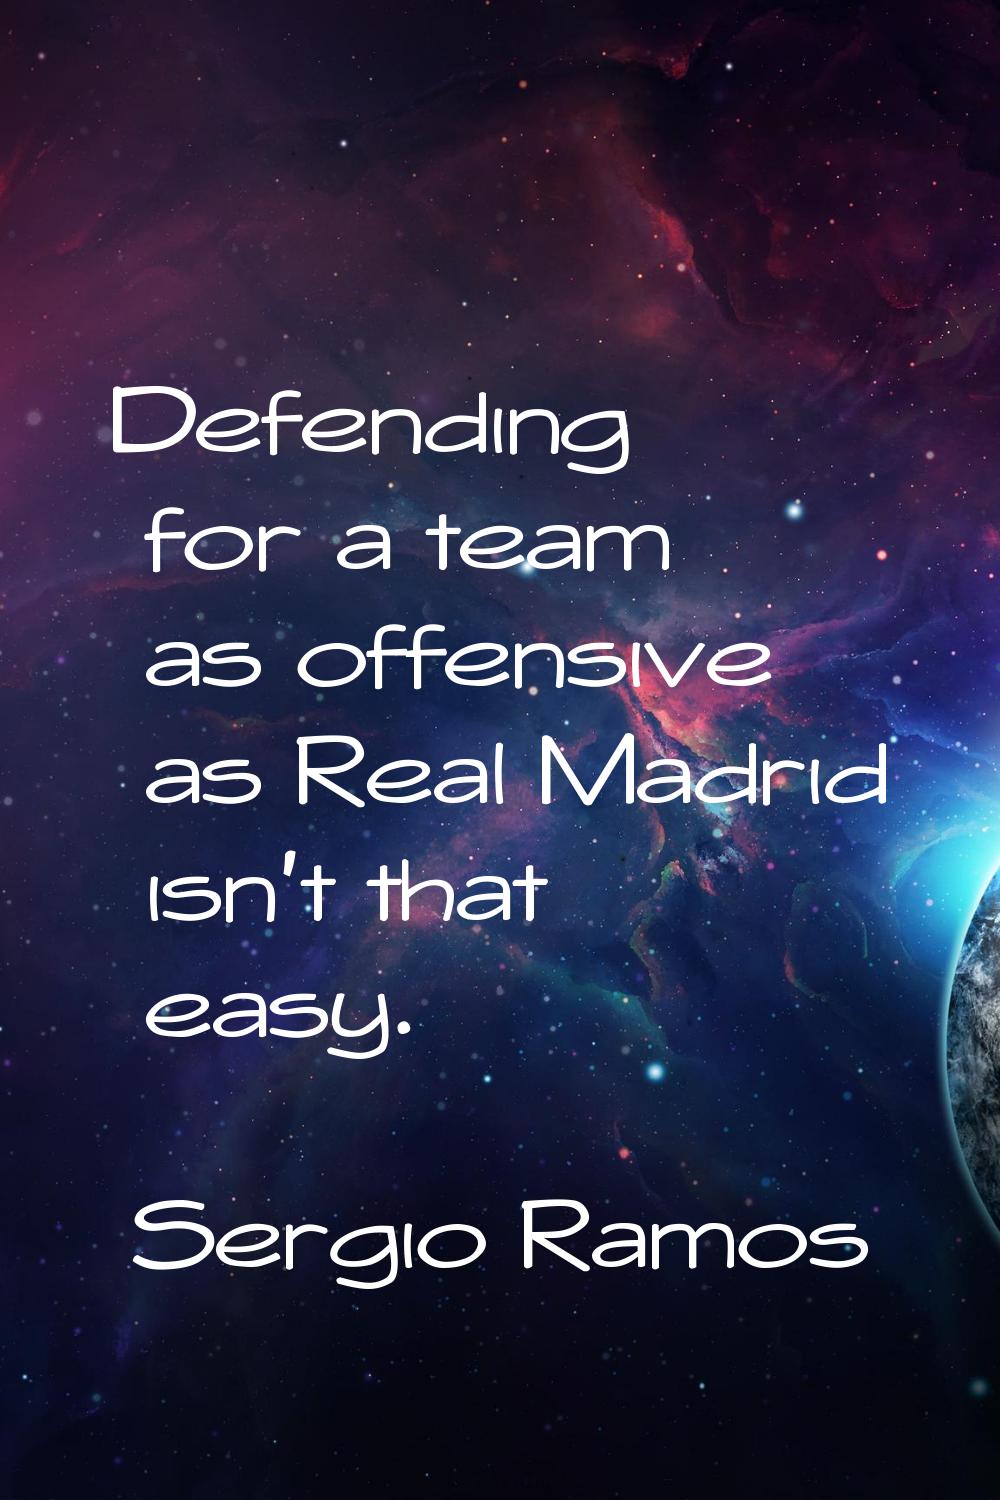 Defending for a team as offensive as Real Madrid isn't that easy.